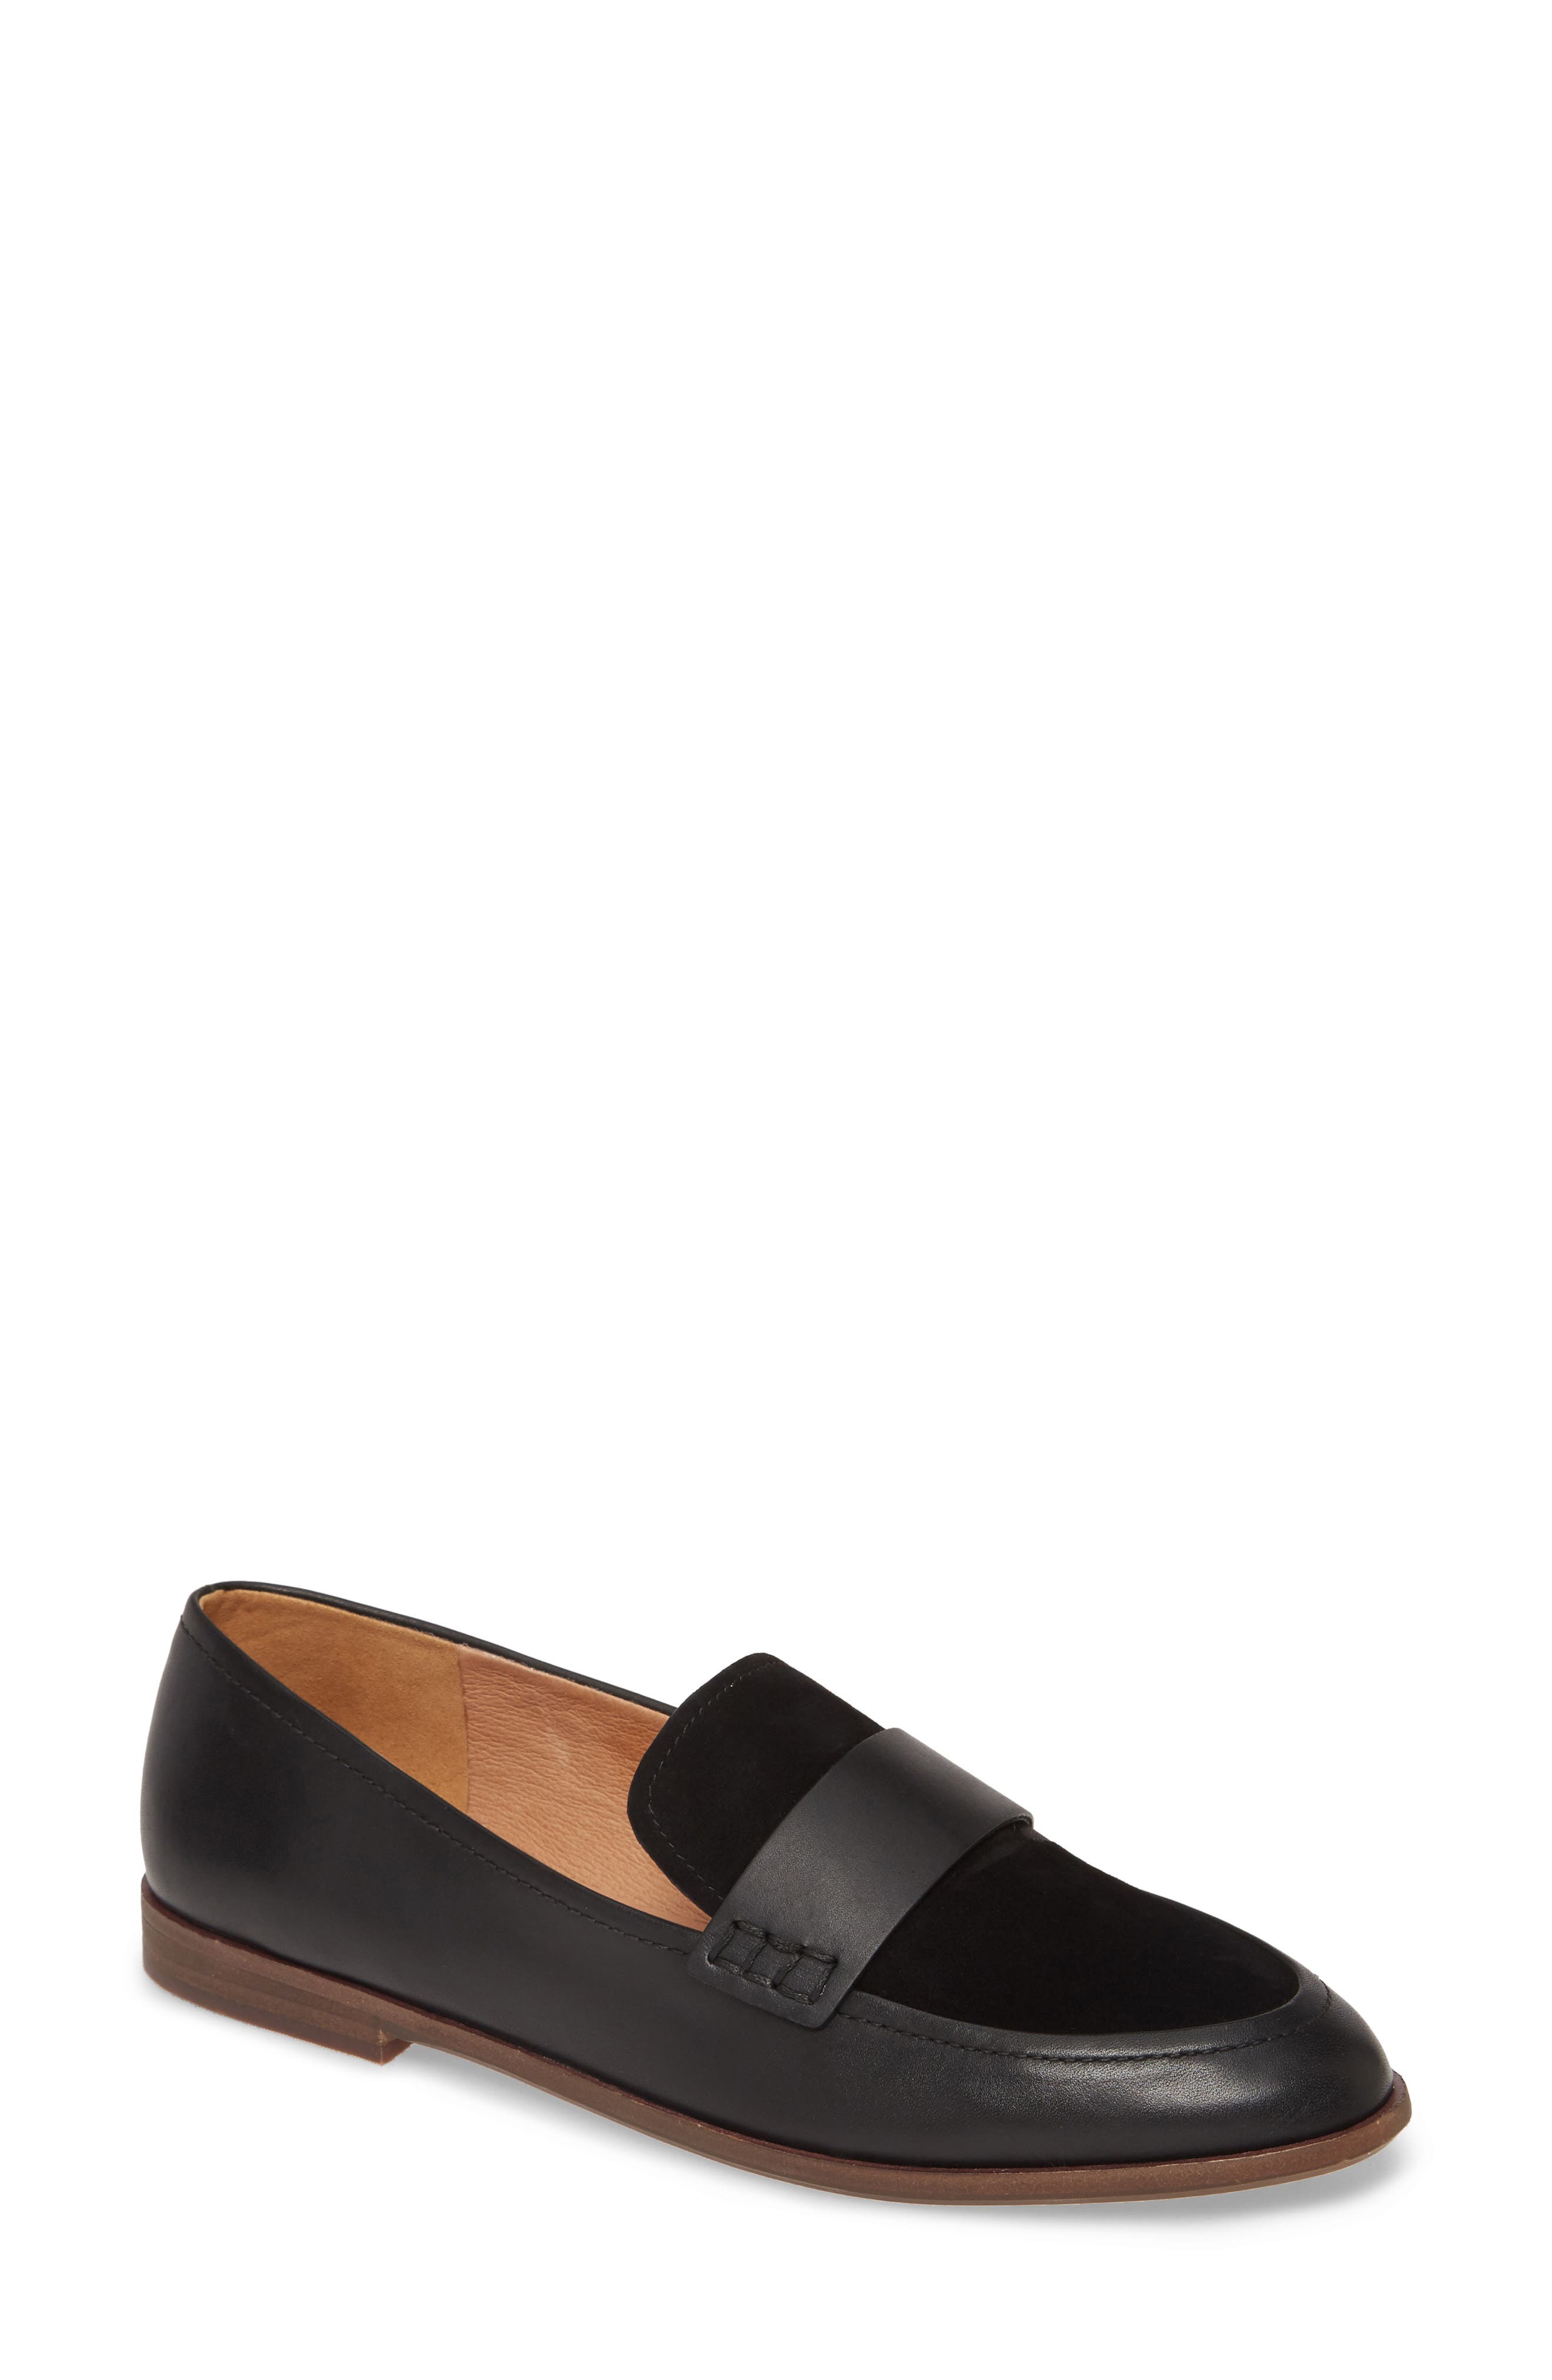 MADEWELL THE ALEX LOAFER,191208801459